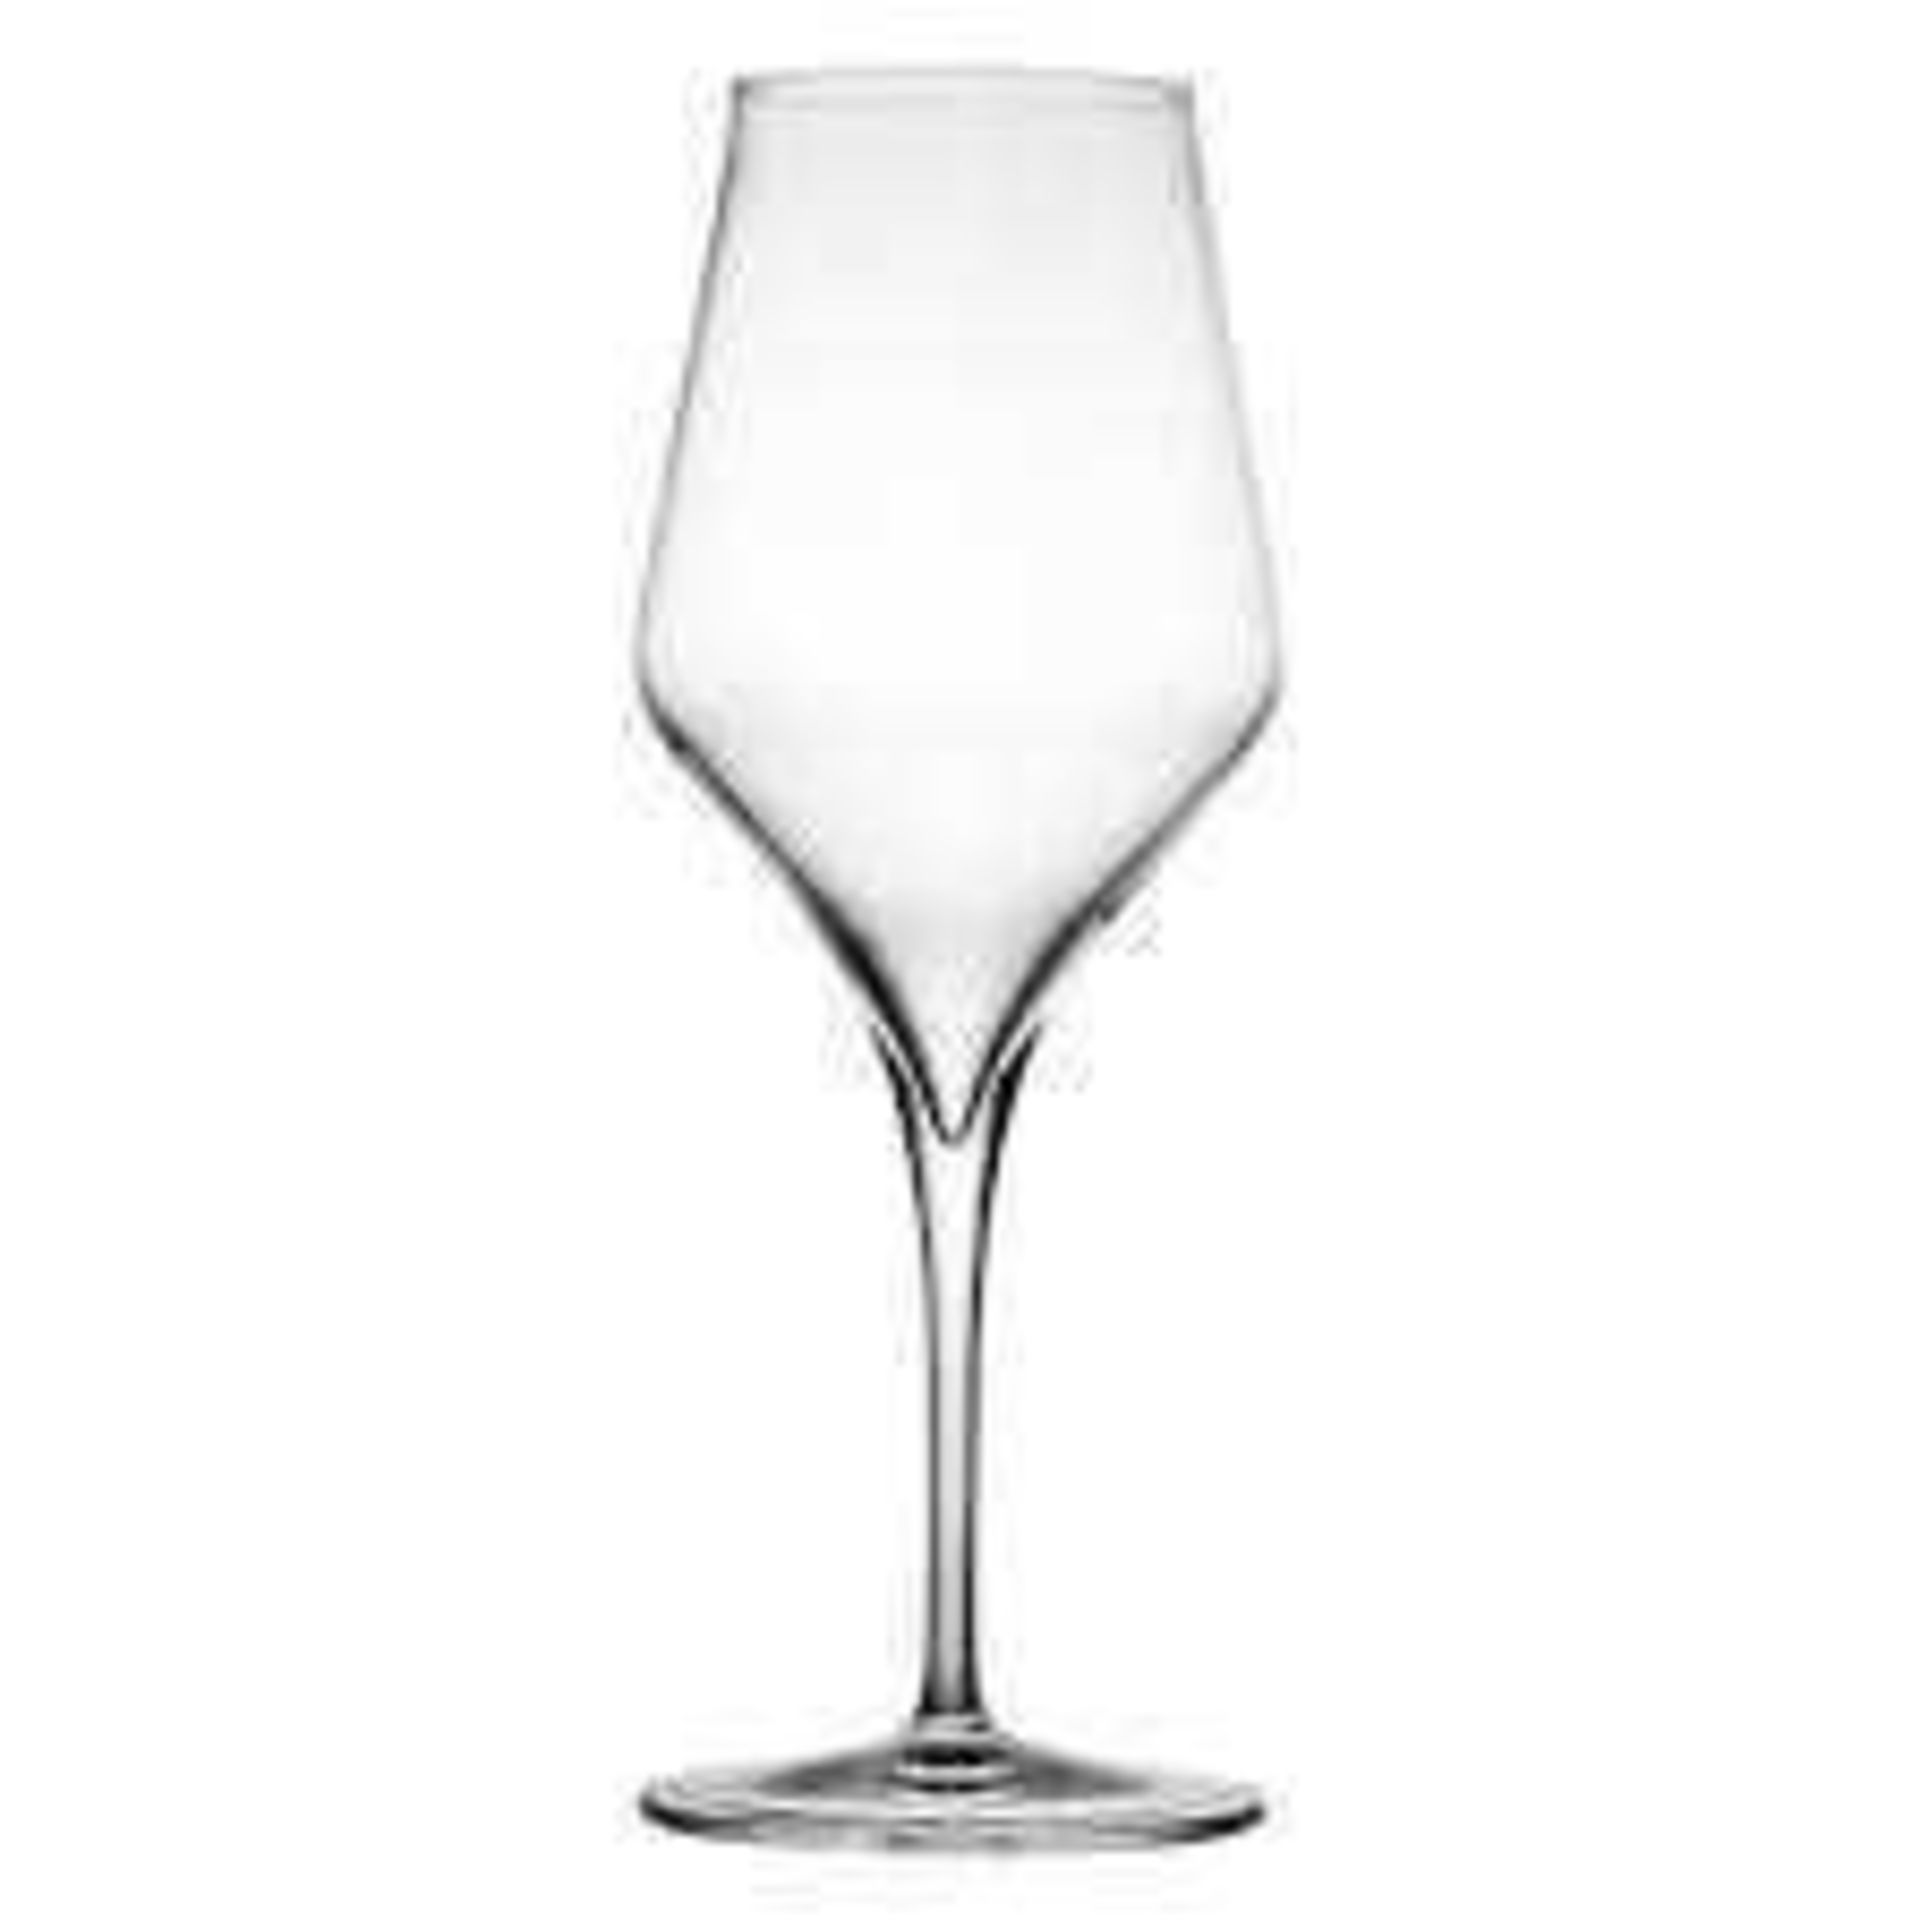 Combined RRP £100 Lots Contain Four Boxes Of John Lewis Connoisseur Red Wine Glasses In Sets Of 4